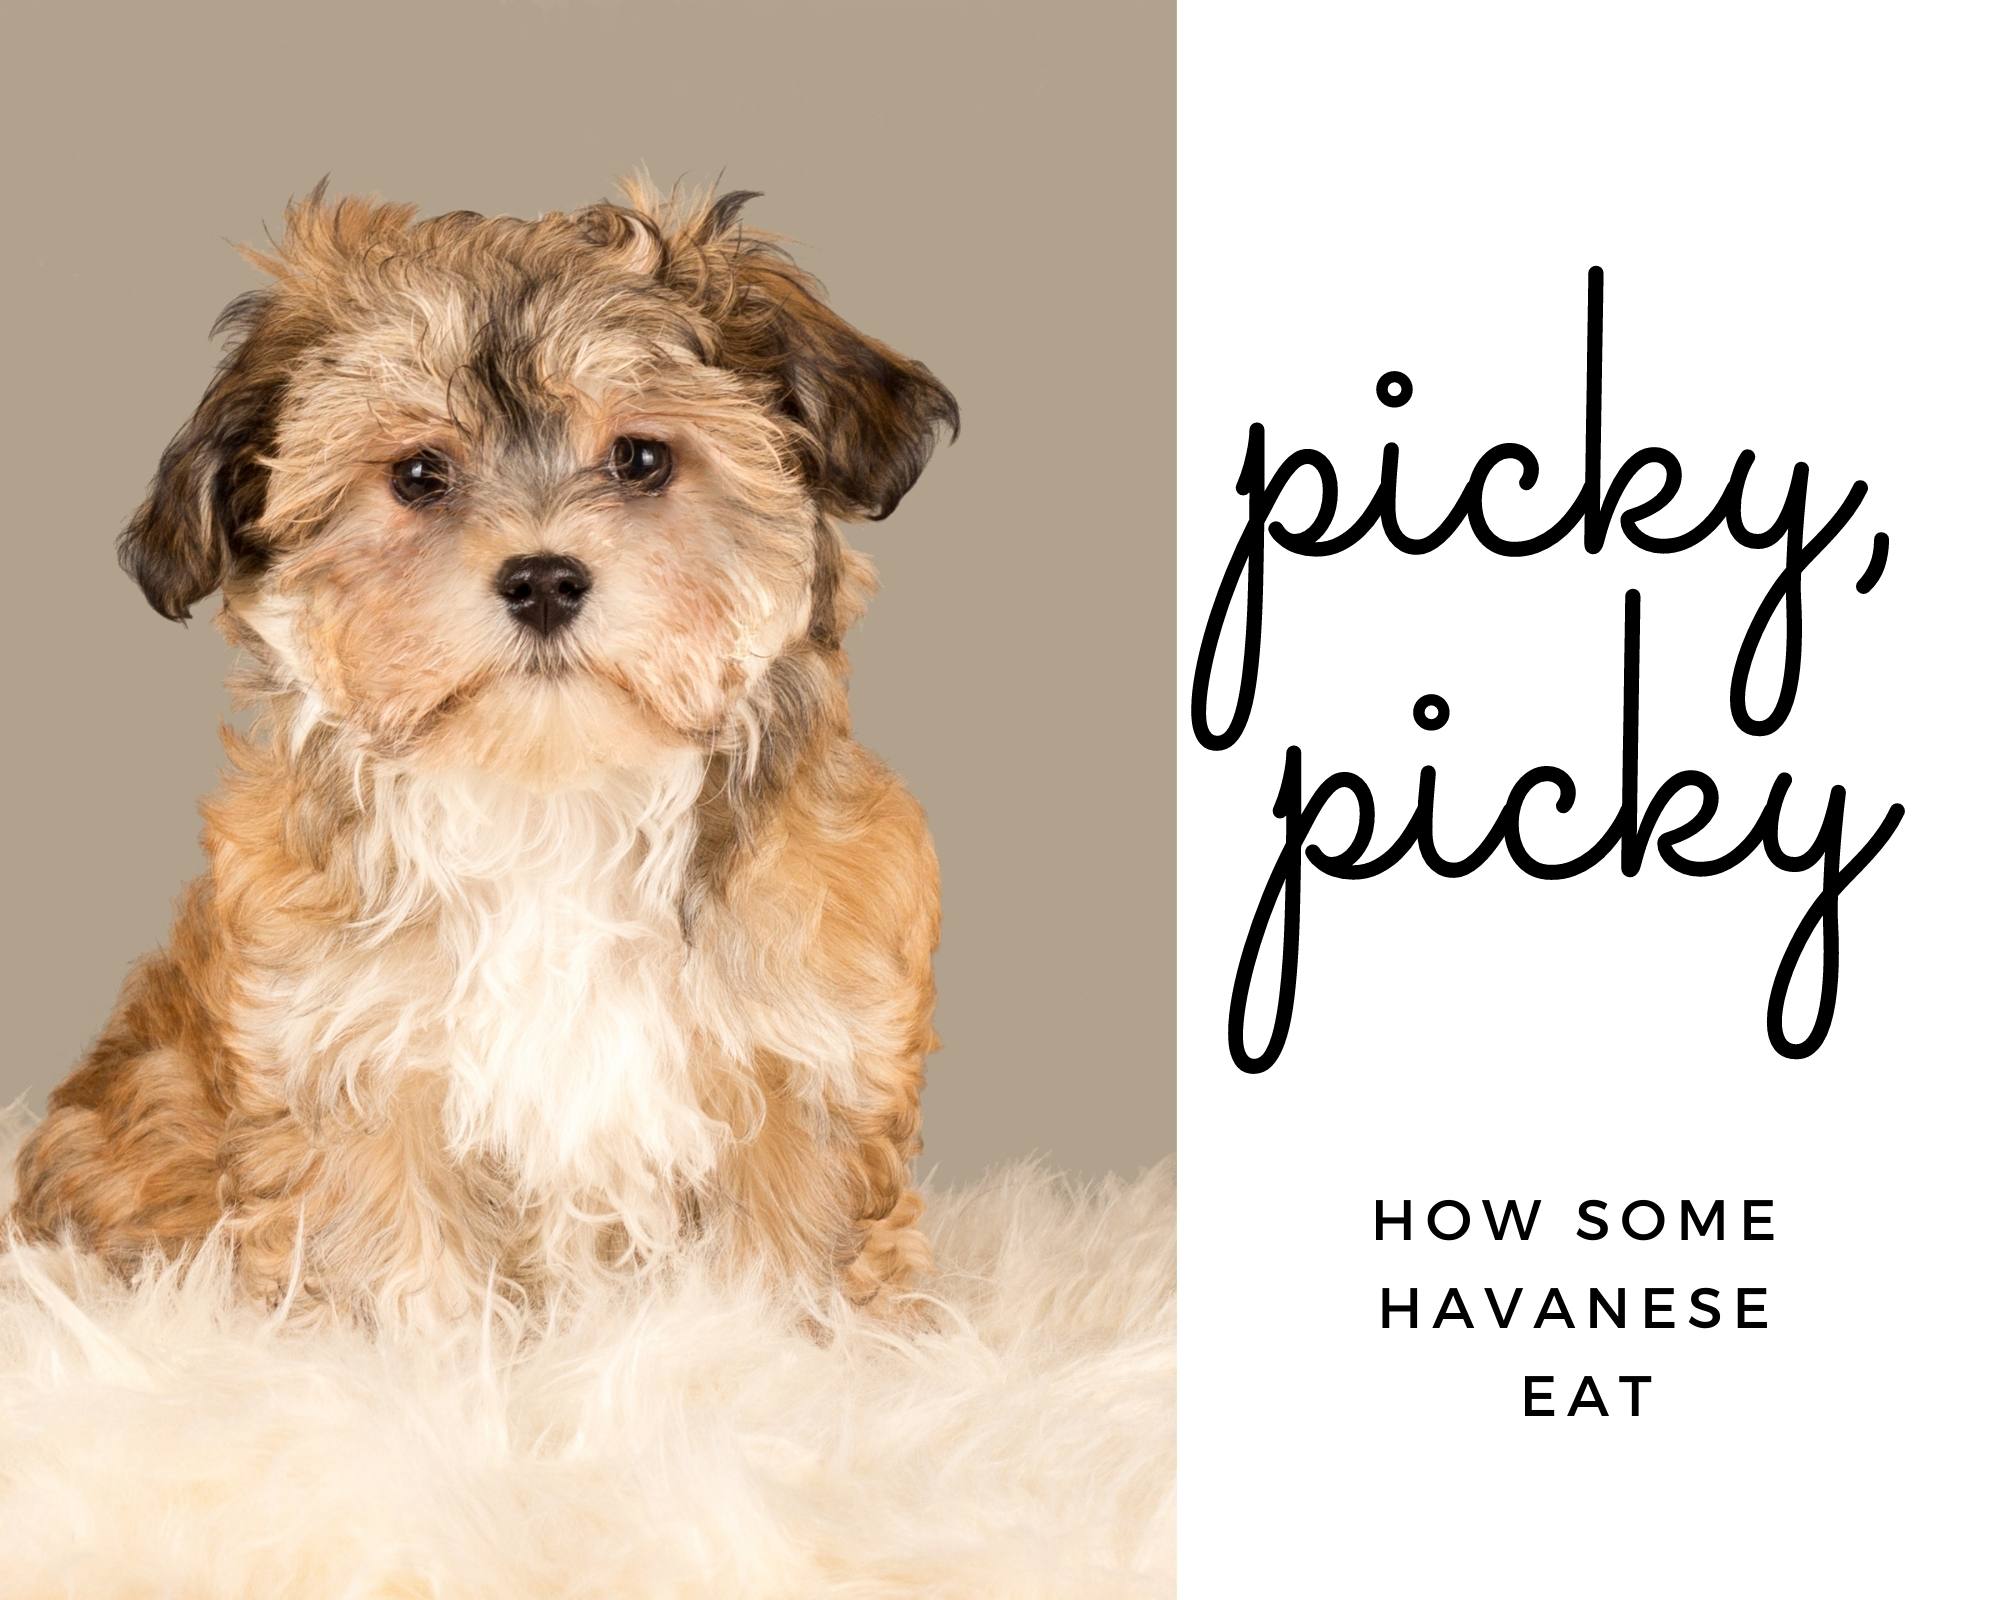 Picture of stubborn looking Havanese puppy next to words "picky, picky"